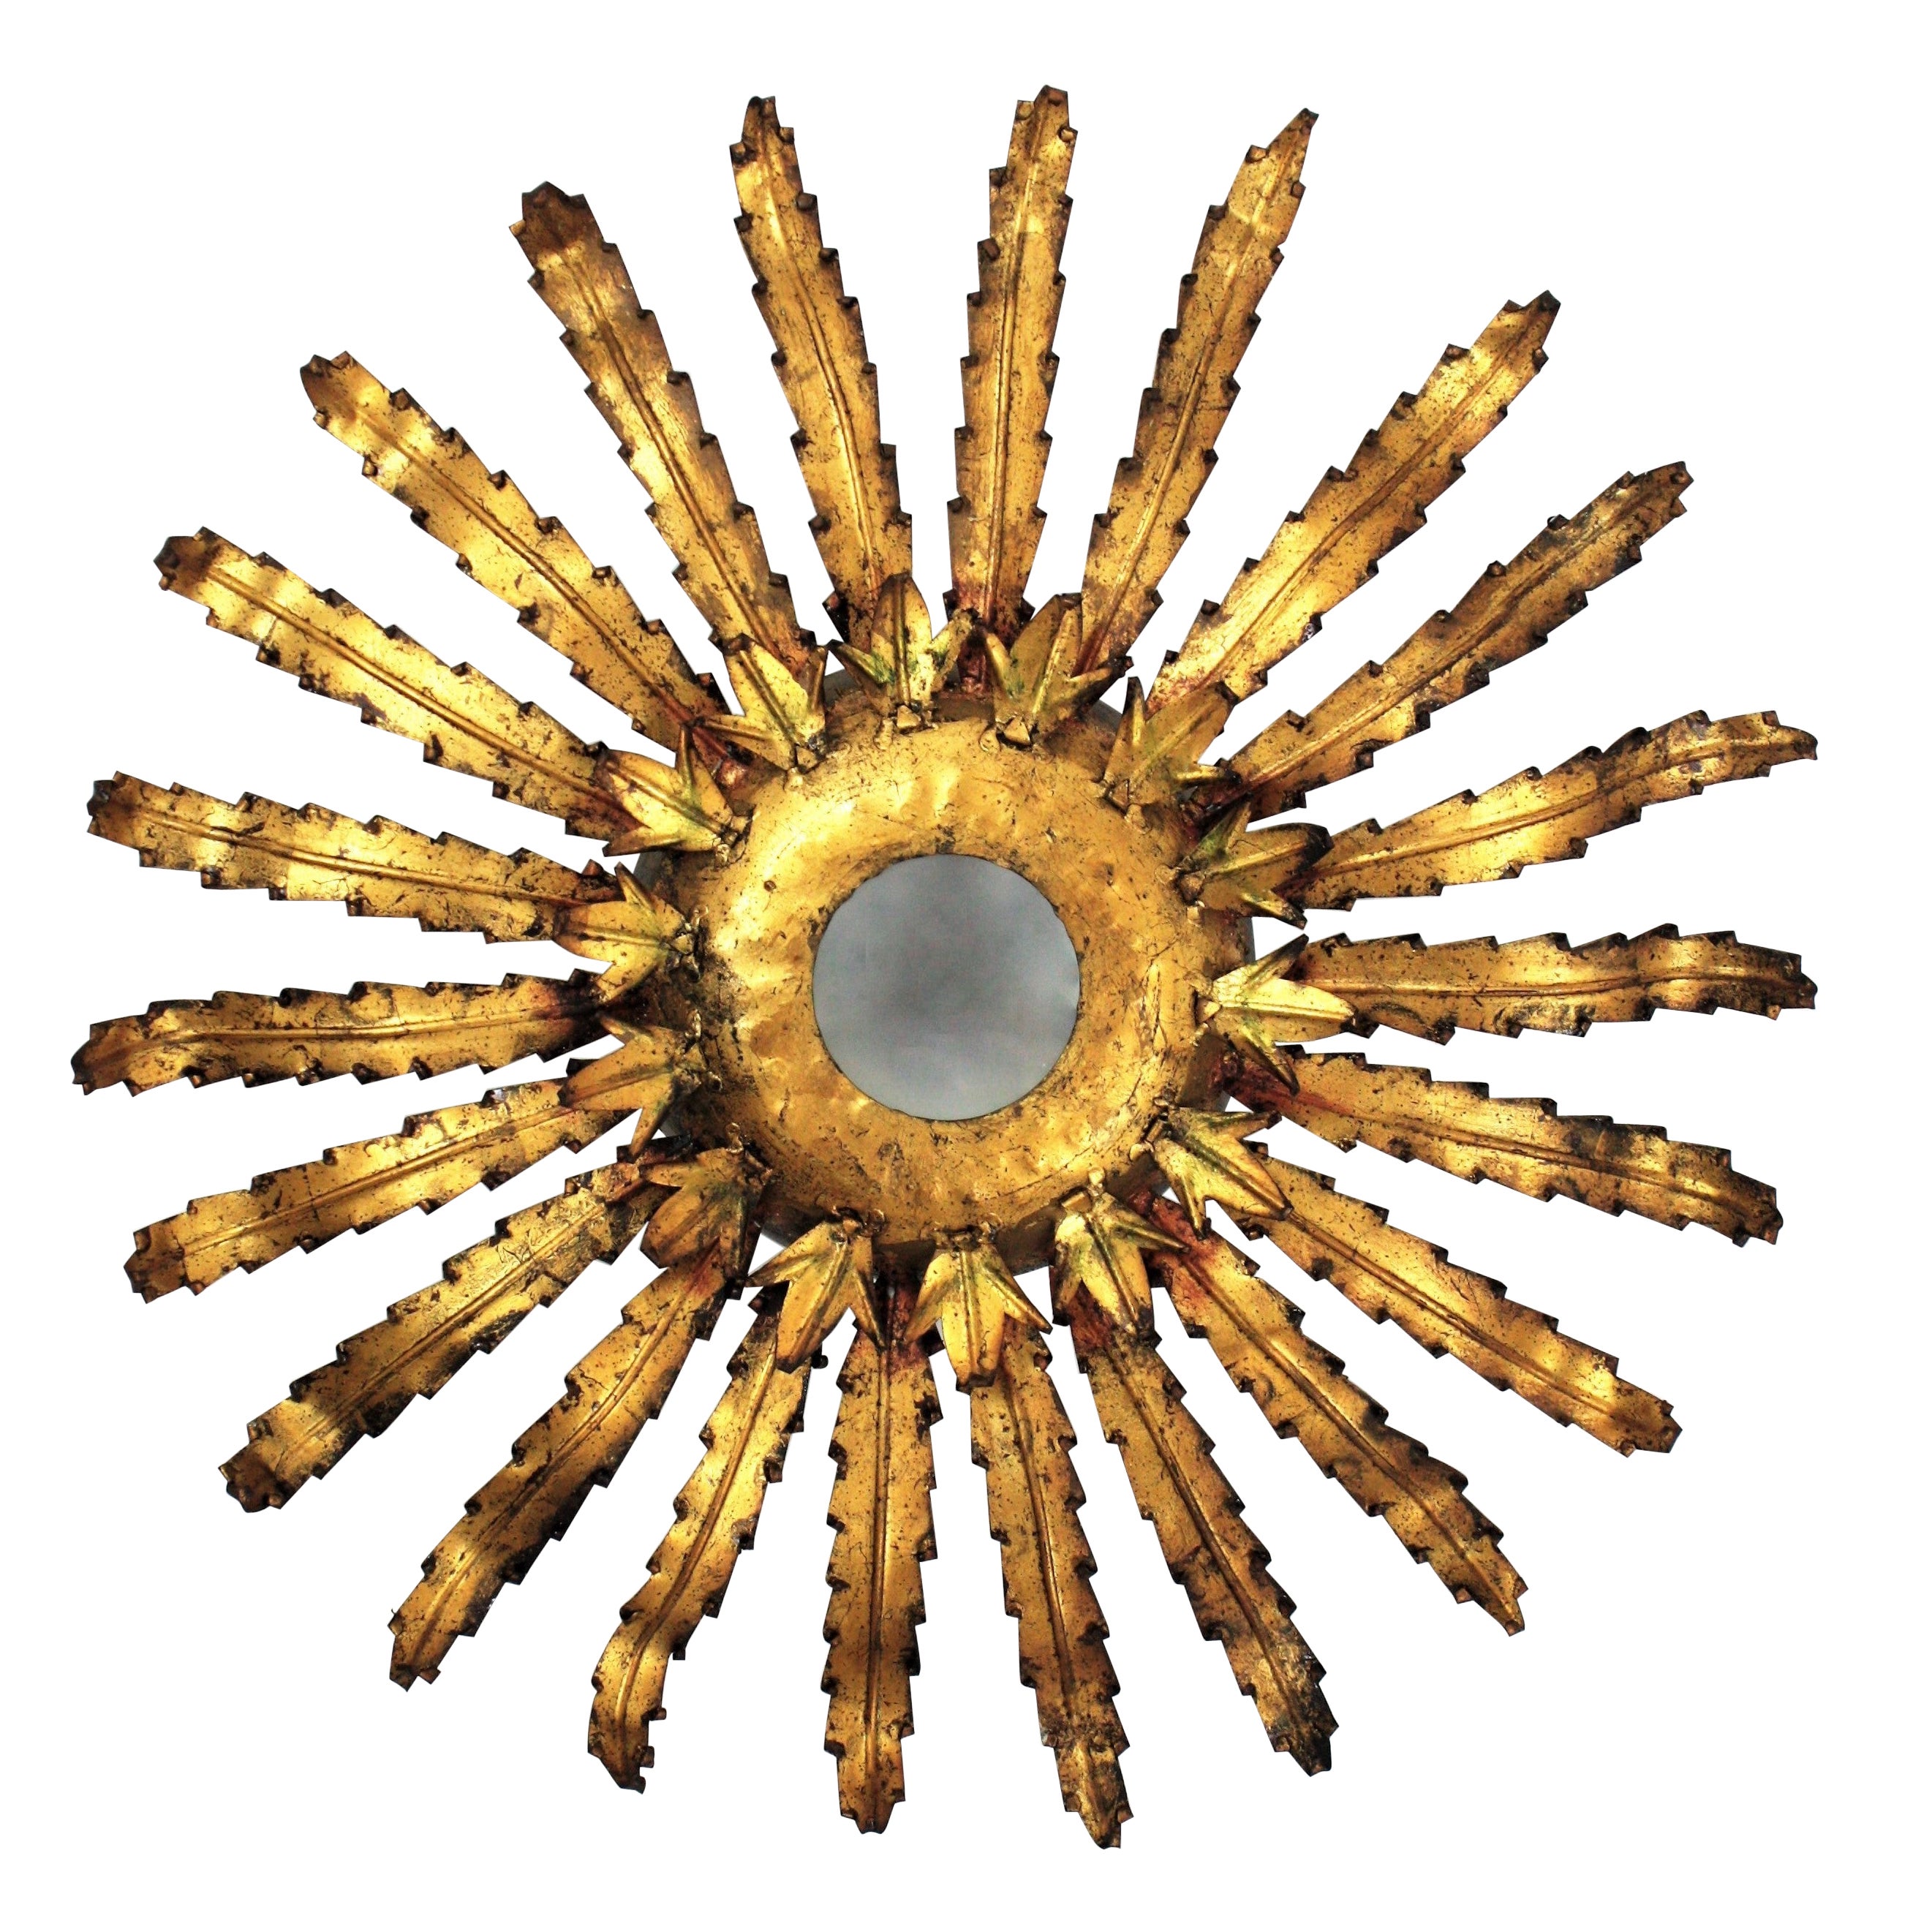 Sunburst Flush mount with leafed frame, gilt iron, Spain, 1950-1960
Design combining brutalist and neoclassical accents.
This eye-catching ceiling light fixture will be gorgeous placed on a dark background.
Use it flush mounted or hanging from a